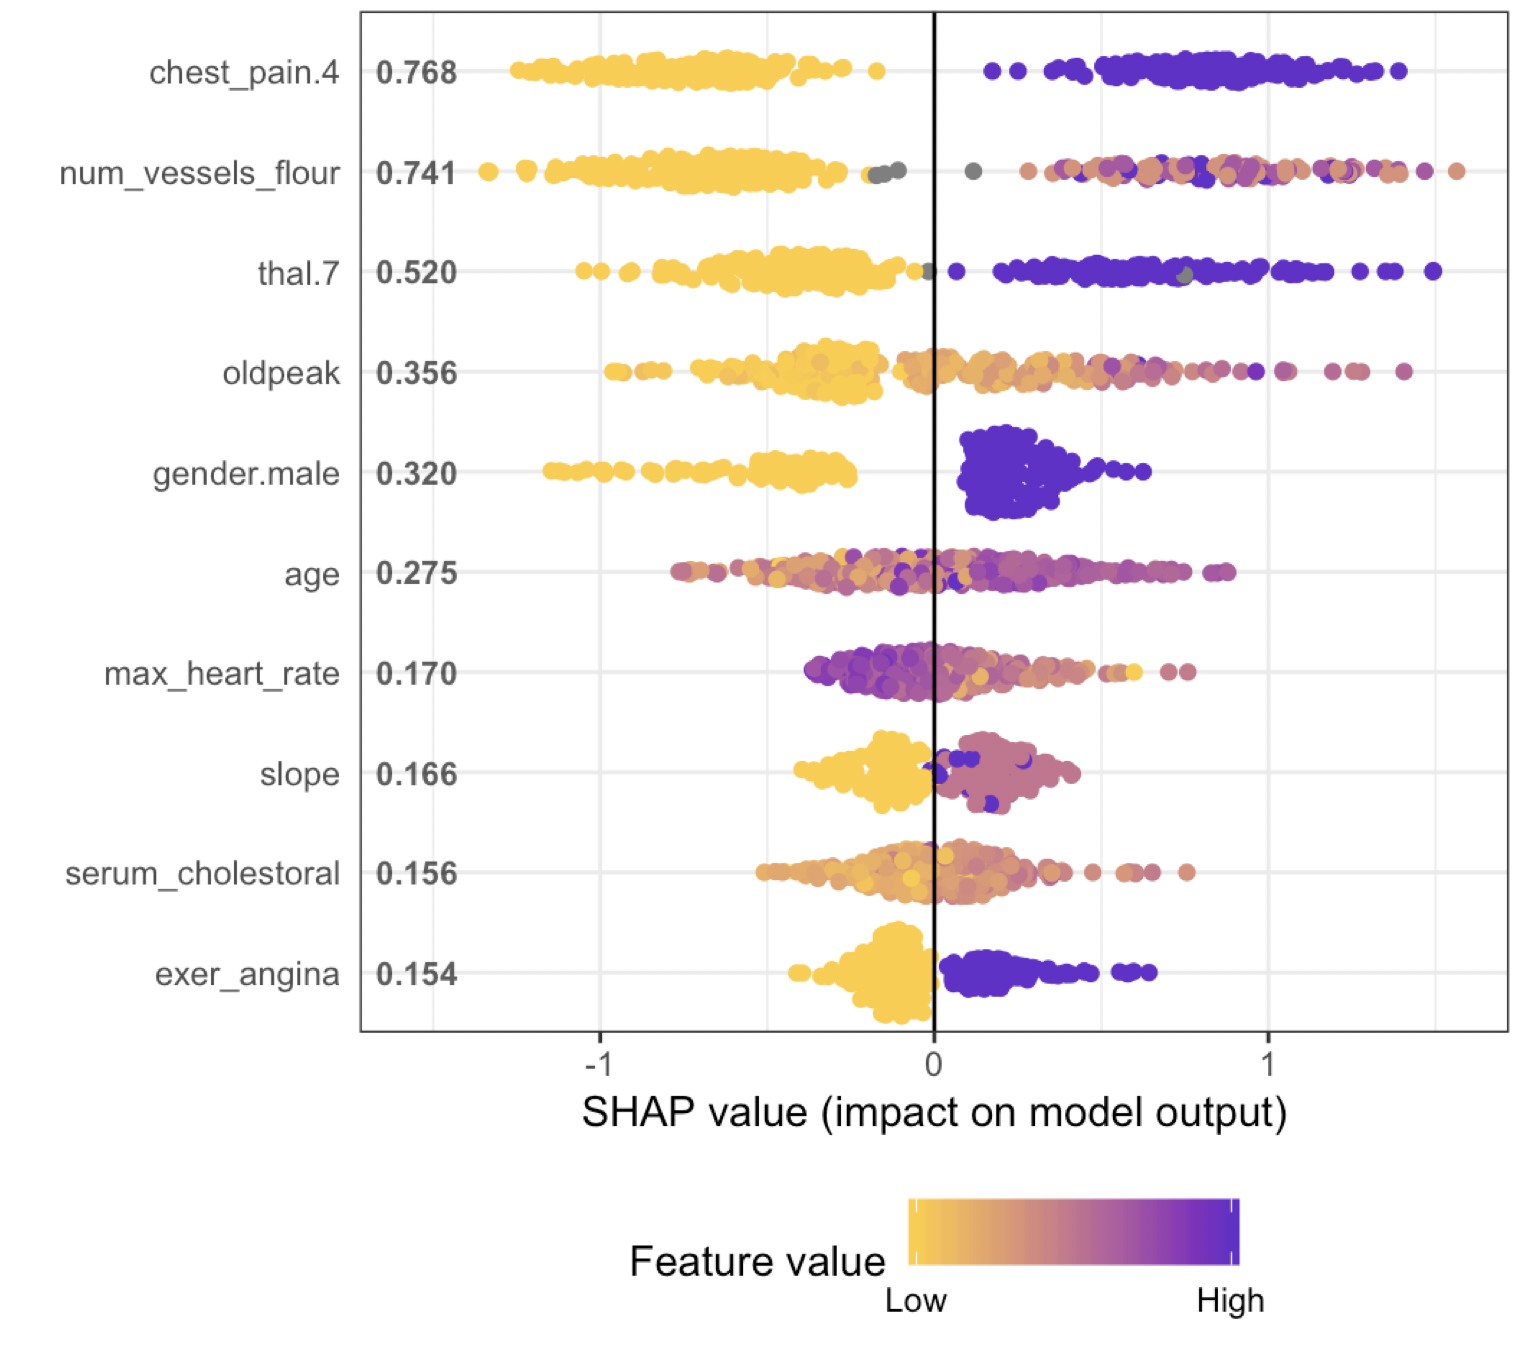 A gentle introduction to SHAP values in R